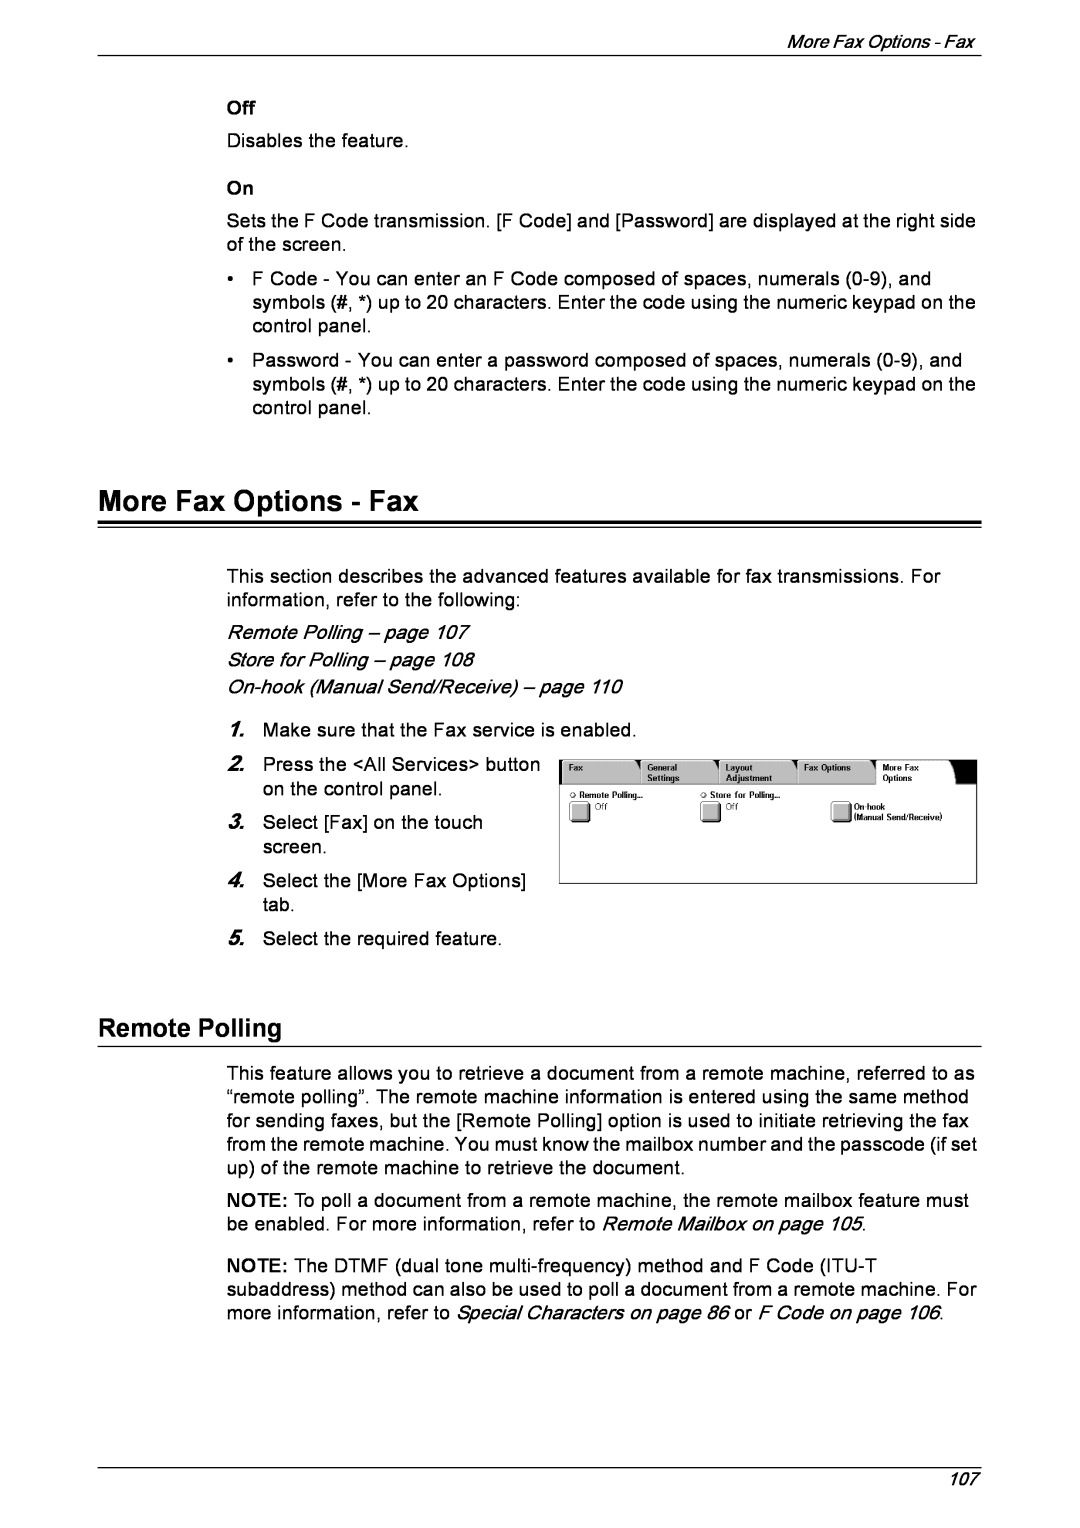 Xerox 5230 More Fax Options - Fax, Remote Polling – page Store for Polling – page, On-hookManual Send/Receive – page 